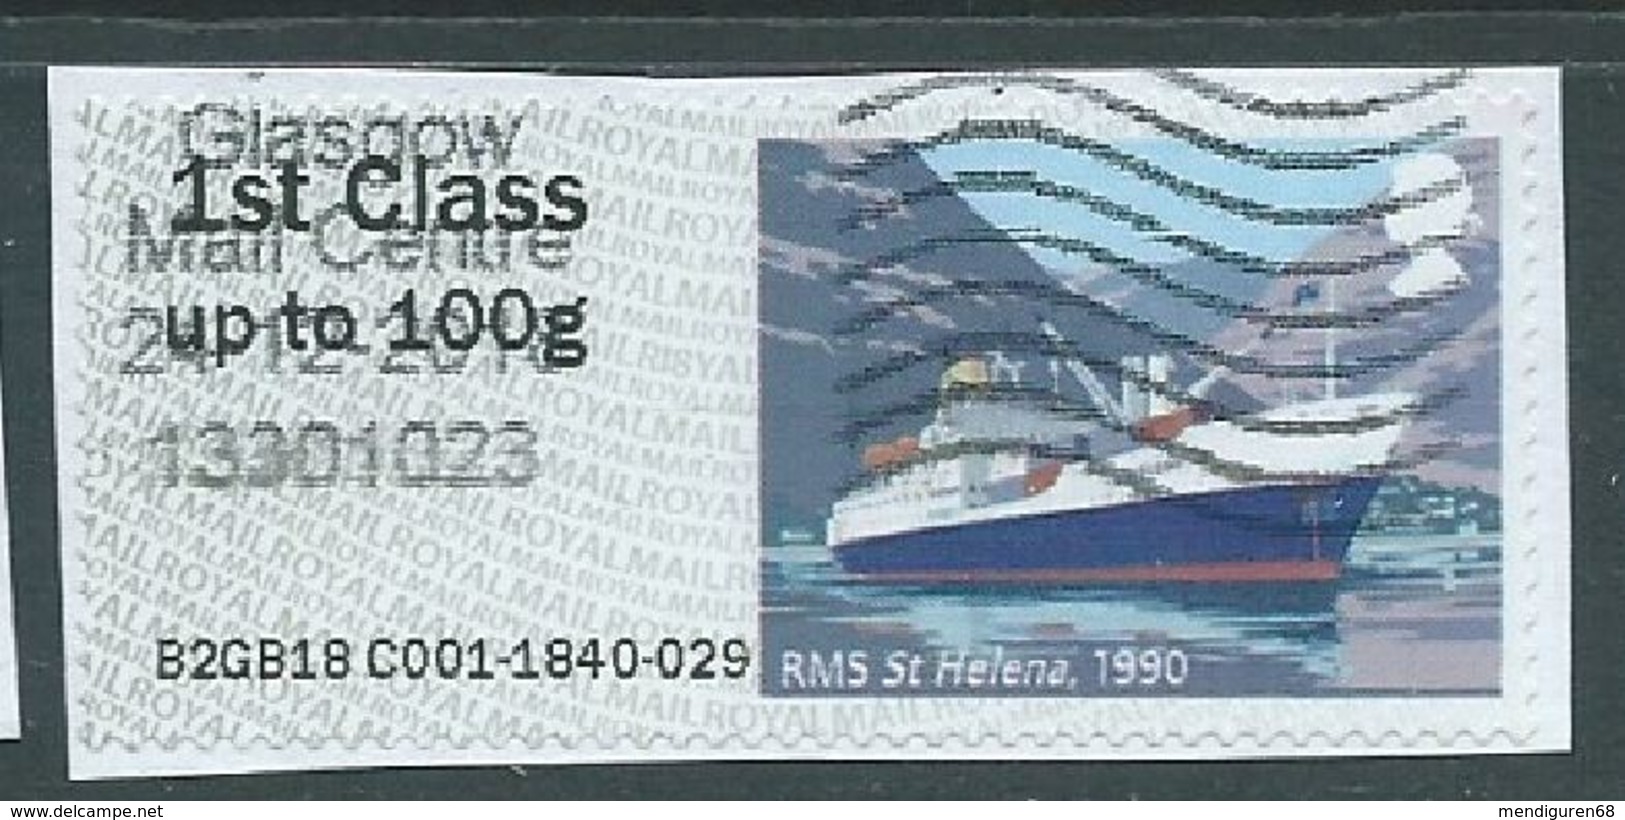 GROSSBRITANNIEN GRANDE BRETAGNE GB 2018 POST&GO ROYAL MAIL HERITAGE:RMS ST HELENA, 1990 FC Up To 100g SG FS212 MI AT144 - Post & Go (automaten)